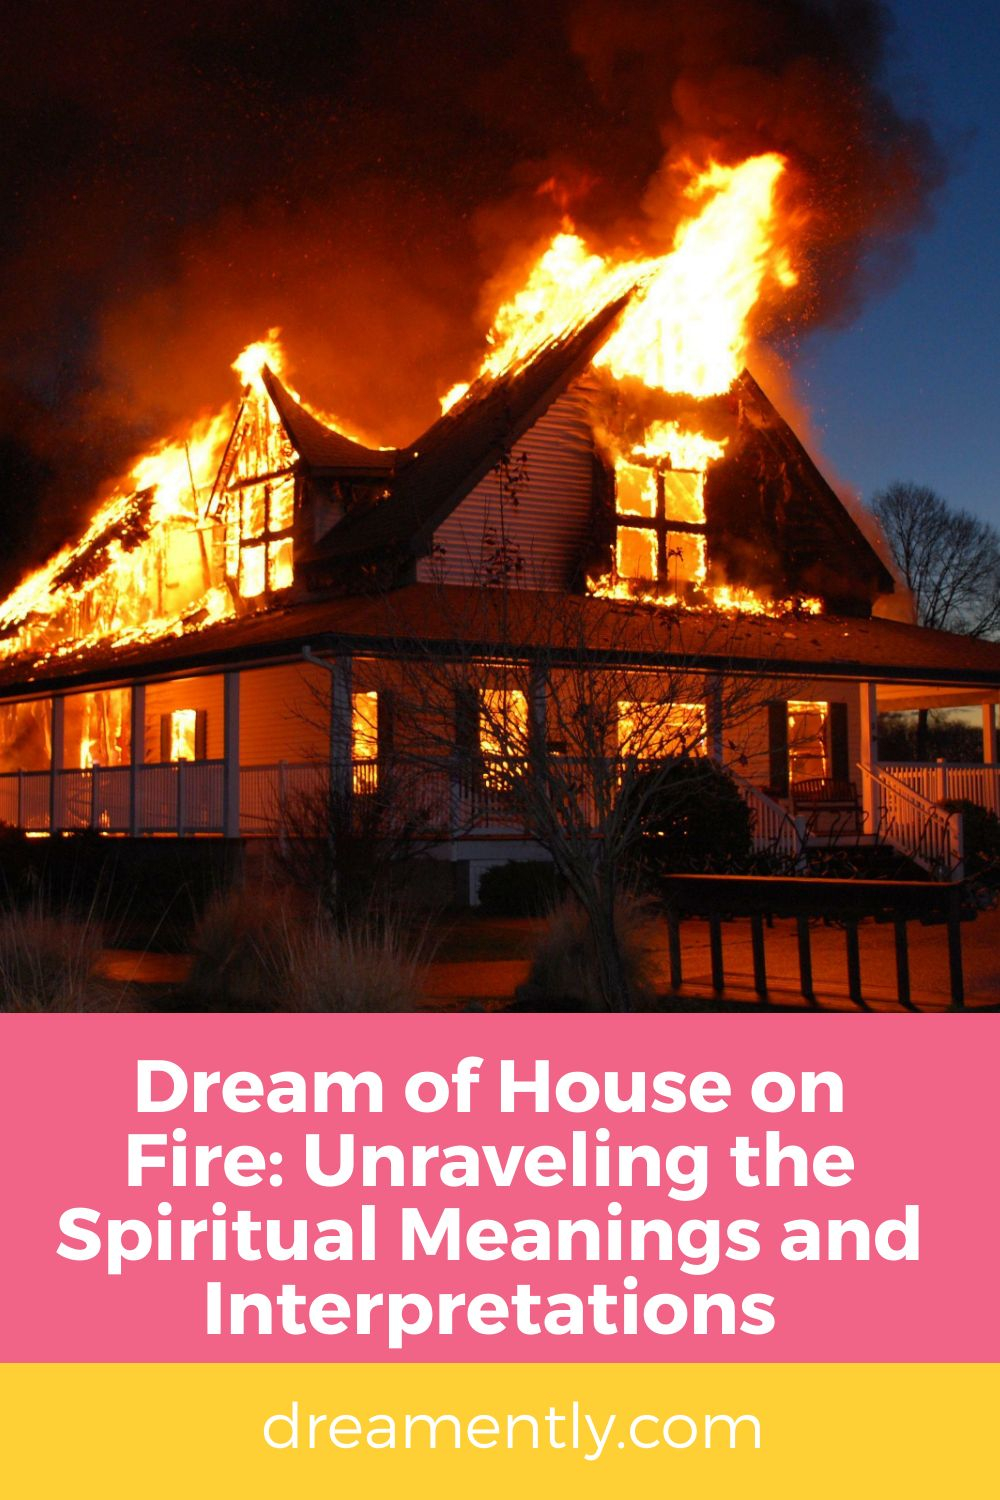 Dream of House on Fire Unraveling the Spiritual Meanings and Interpretations